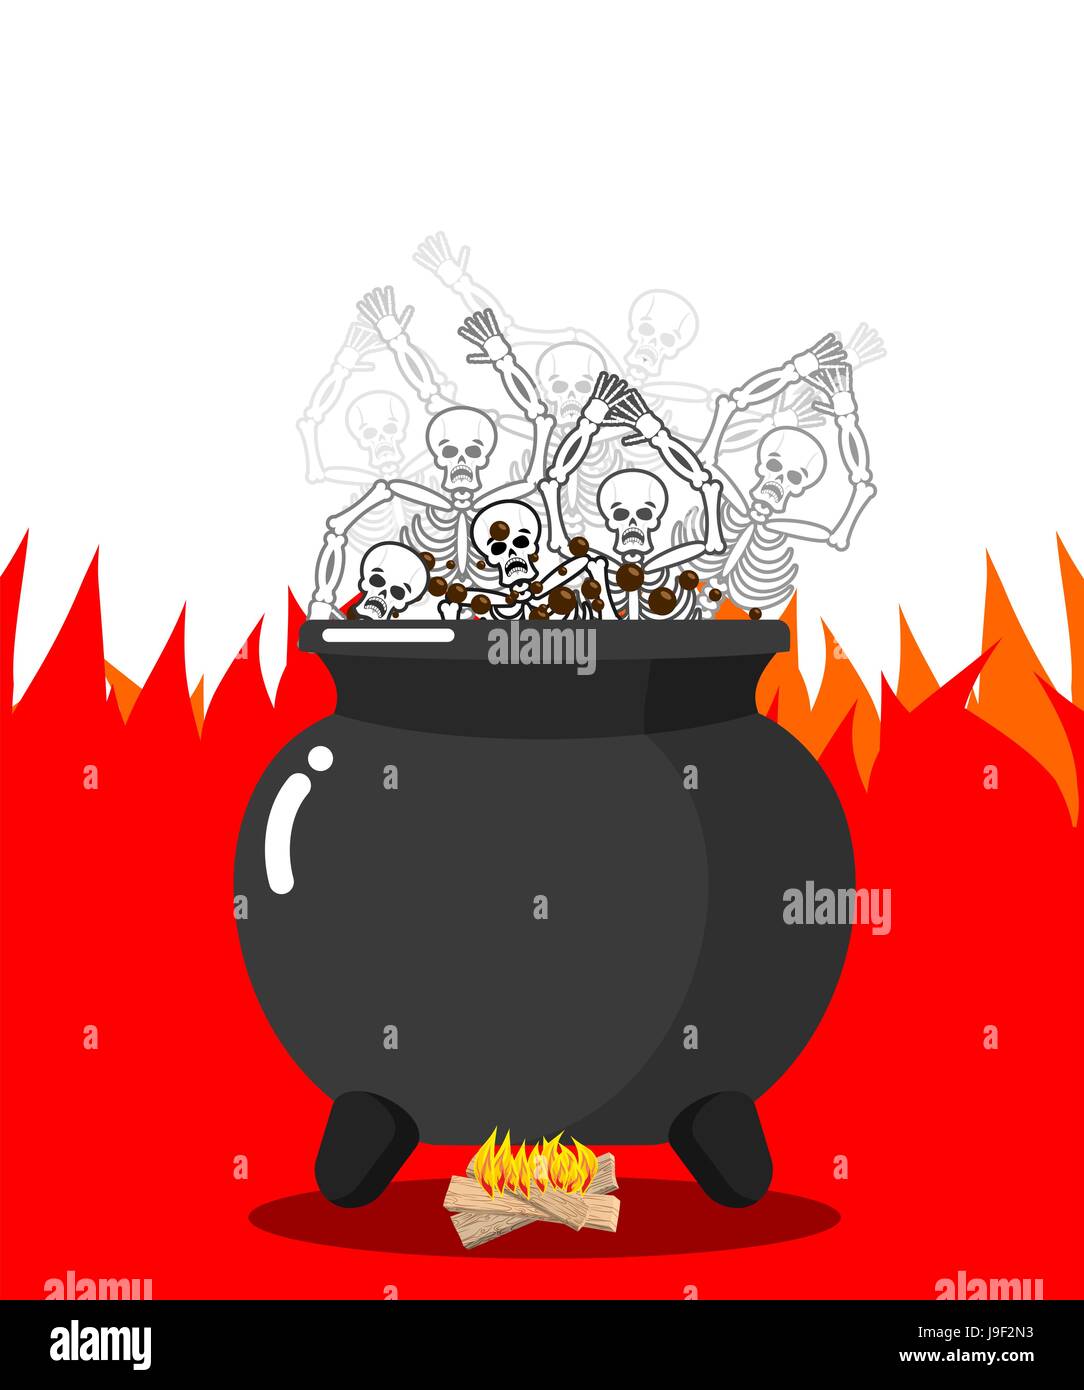 Sinners in cauldron in hell. Skeletons are cooked in resin in underworld. Dead are experiencing hellish pains. Big black pan. Price paid for sins. Rel Stock Vector